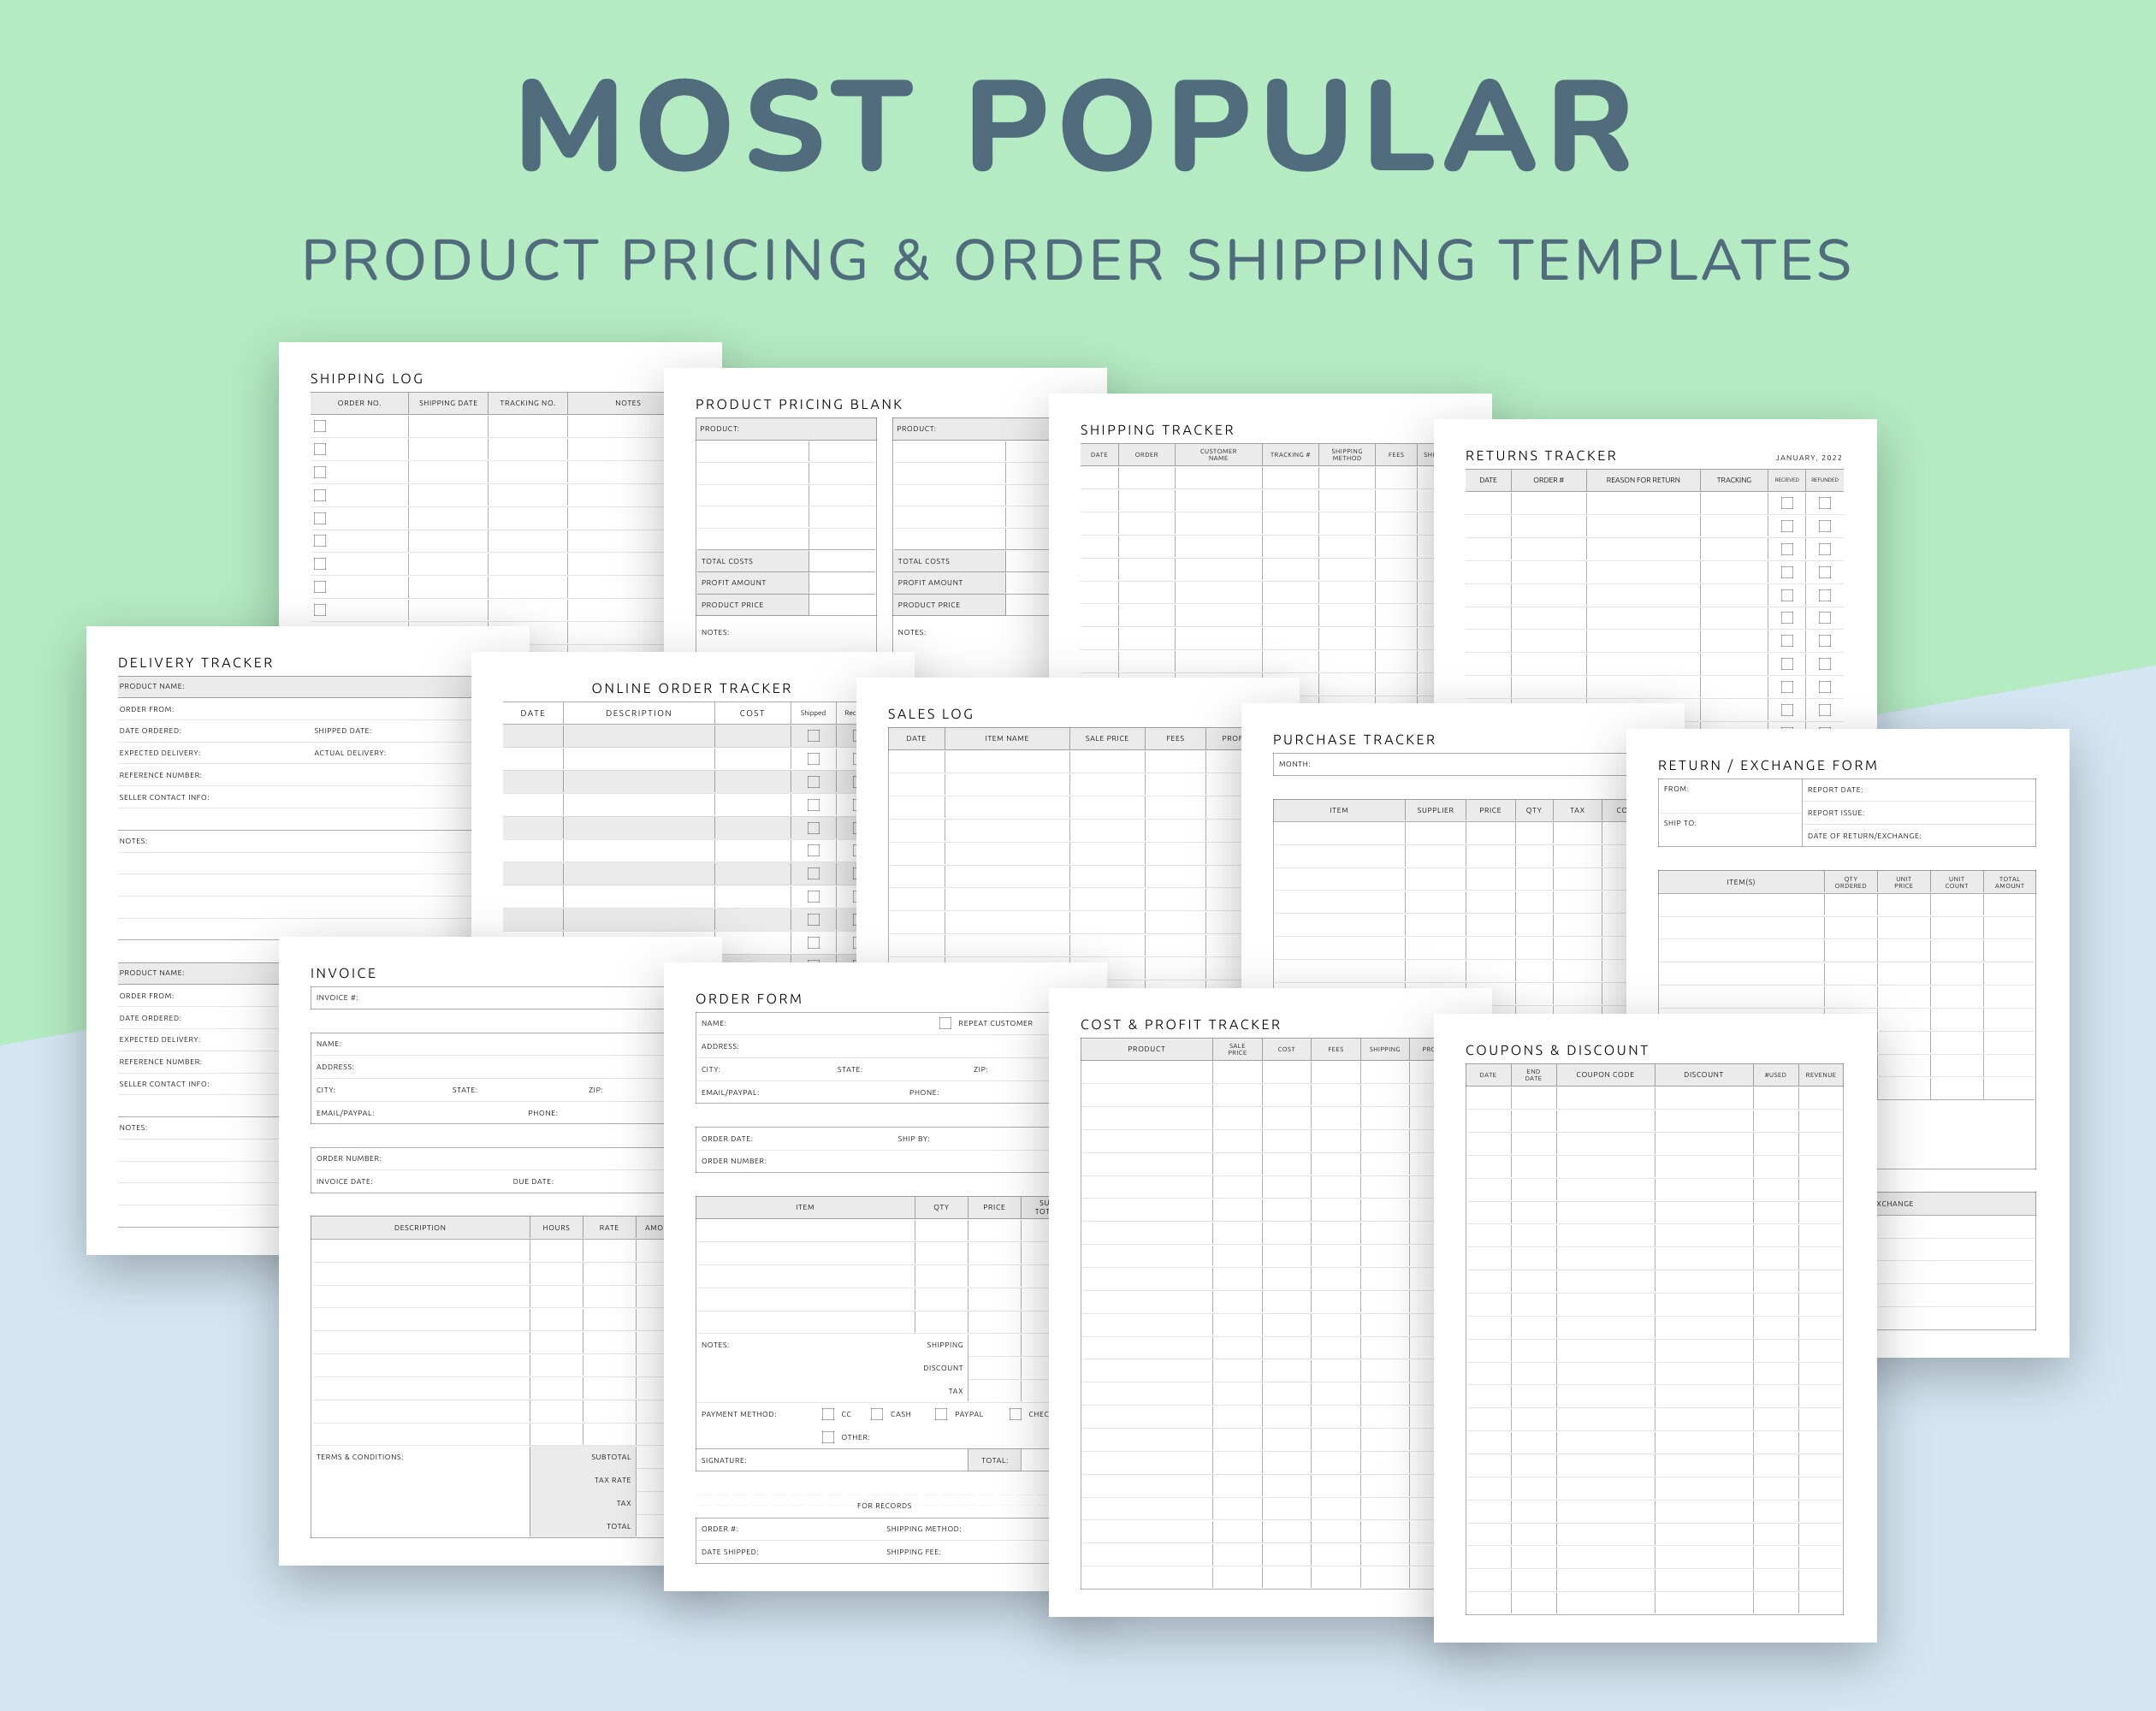 Student Project Planner Printable Template, School Project Tracker